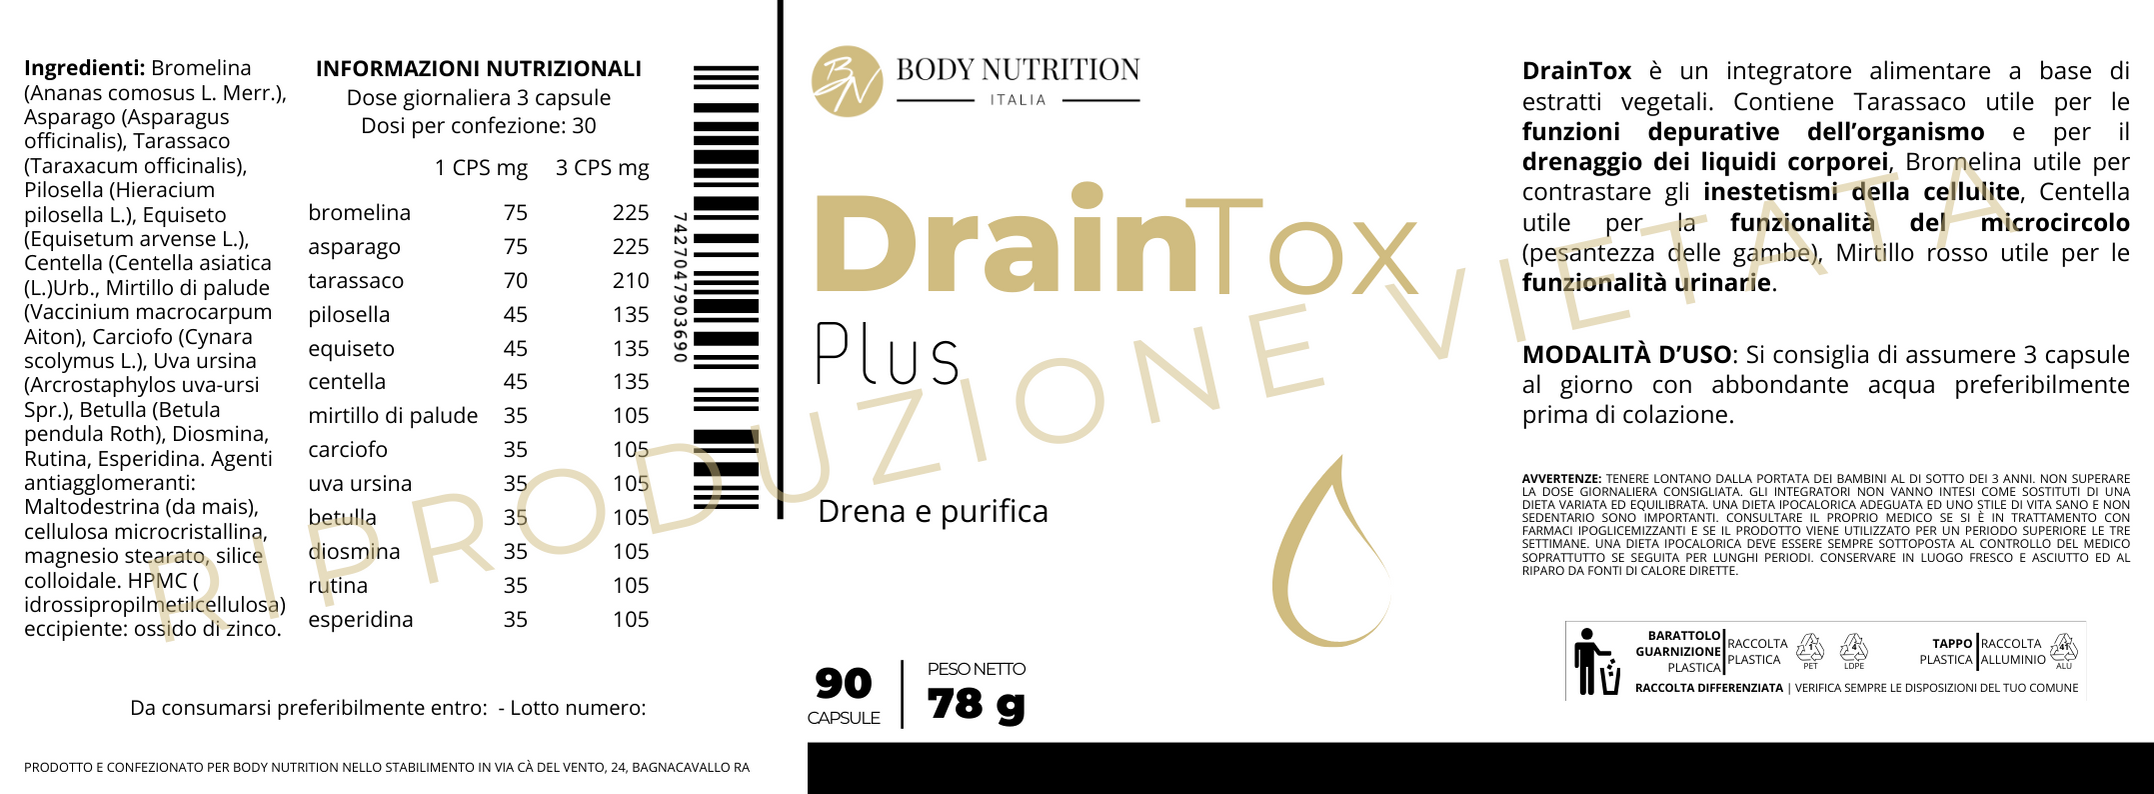 Strong draining - DrainTox 